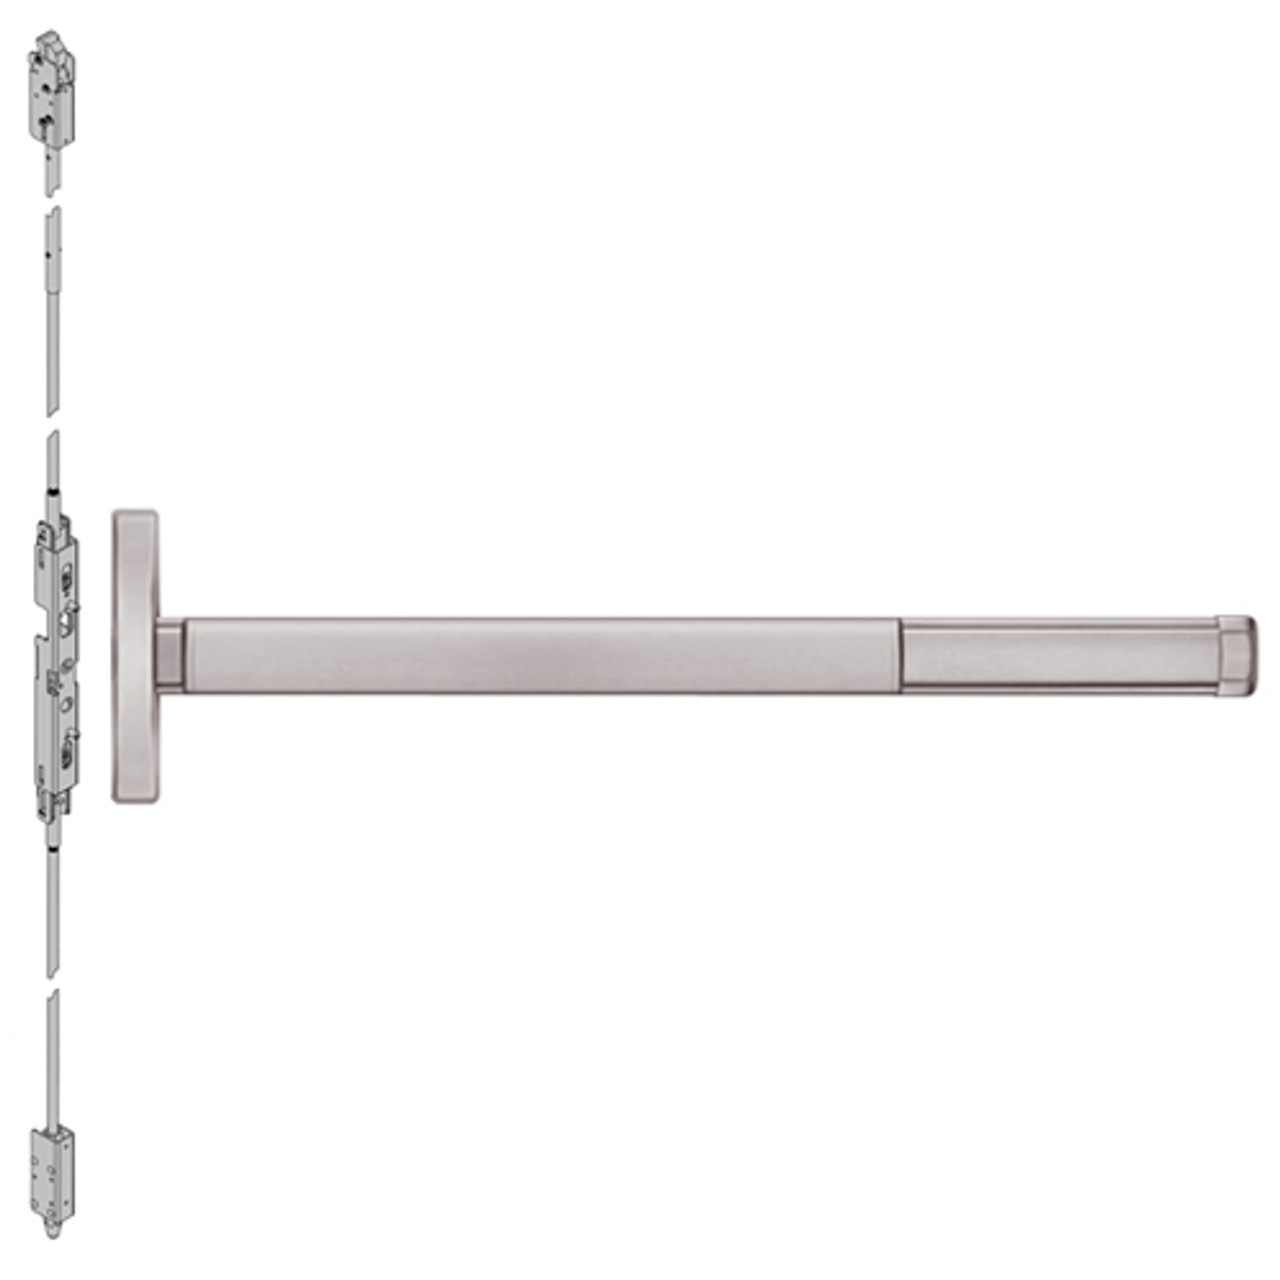 2602LBRCD-628-48 PHI 2600 Series Non Fire Rated Concealed Vertical Rod Exit Device Prepped for Dummy Trim with Cylinder Dogging and LBR in Satin Aluminum Finish